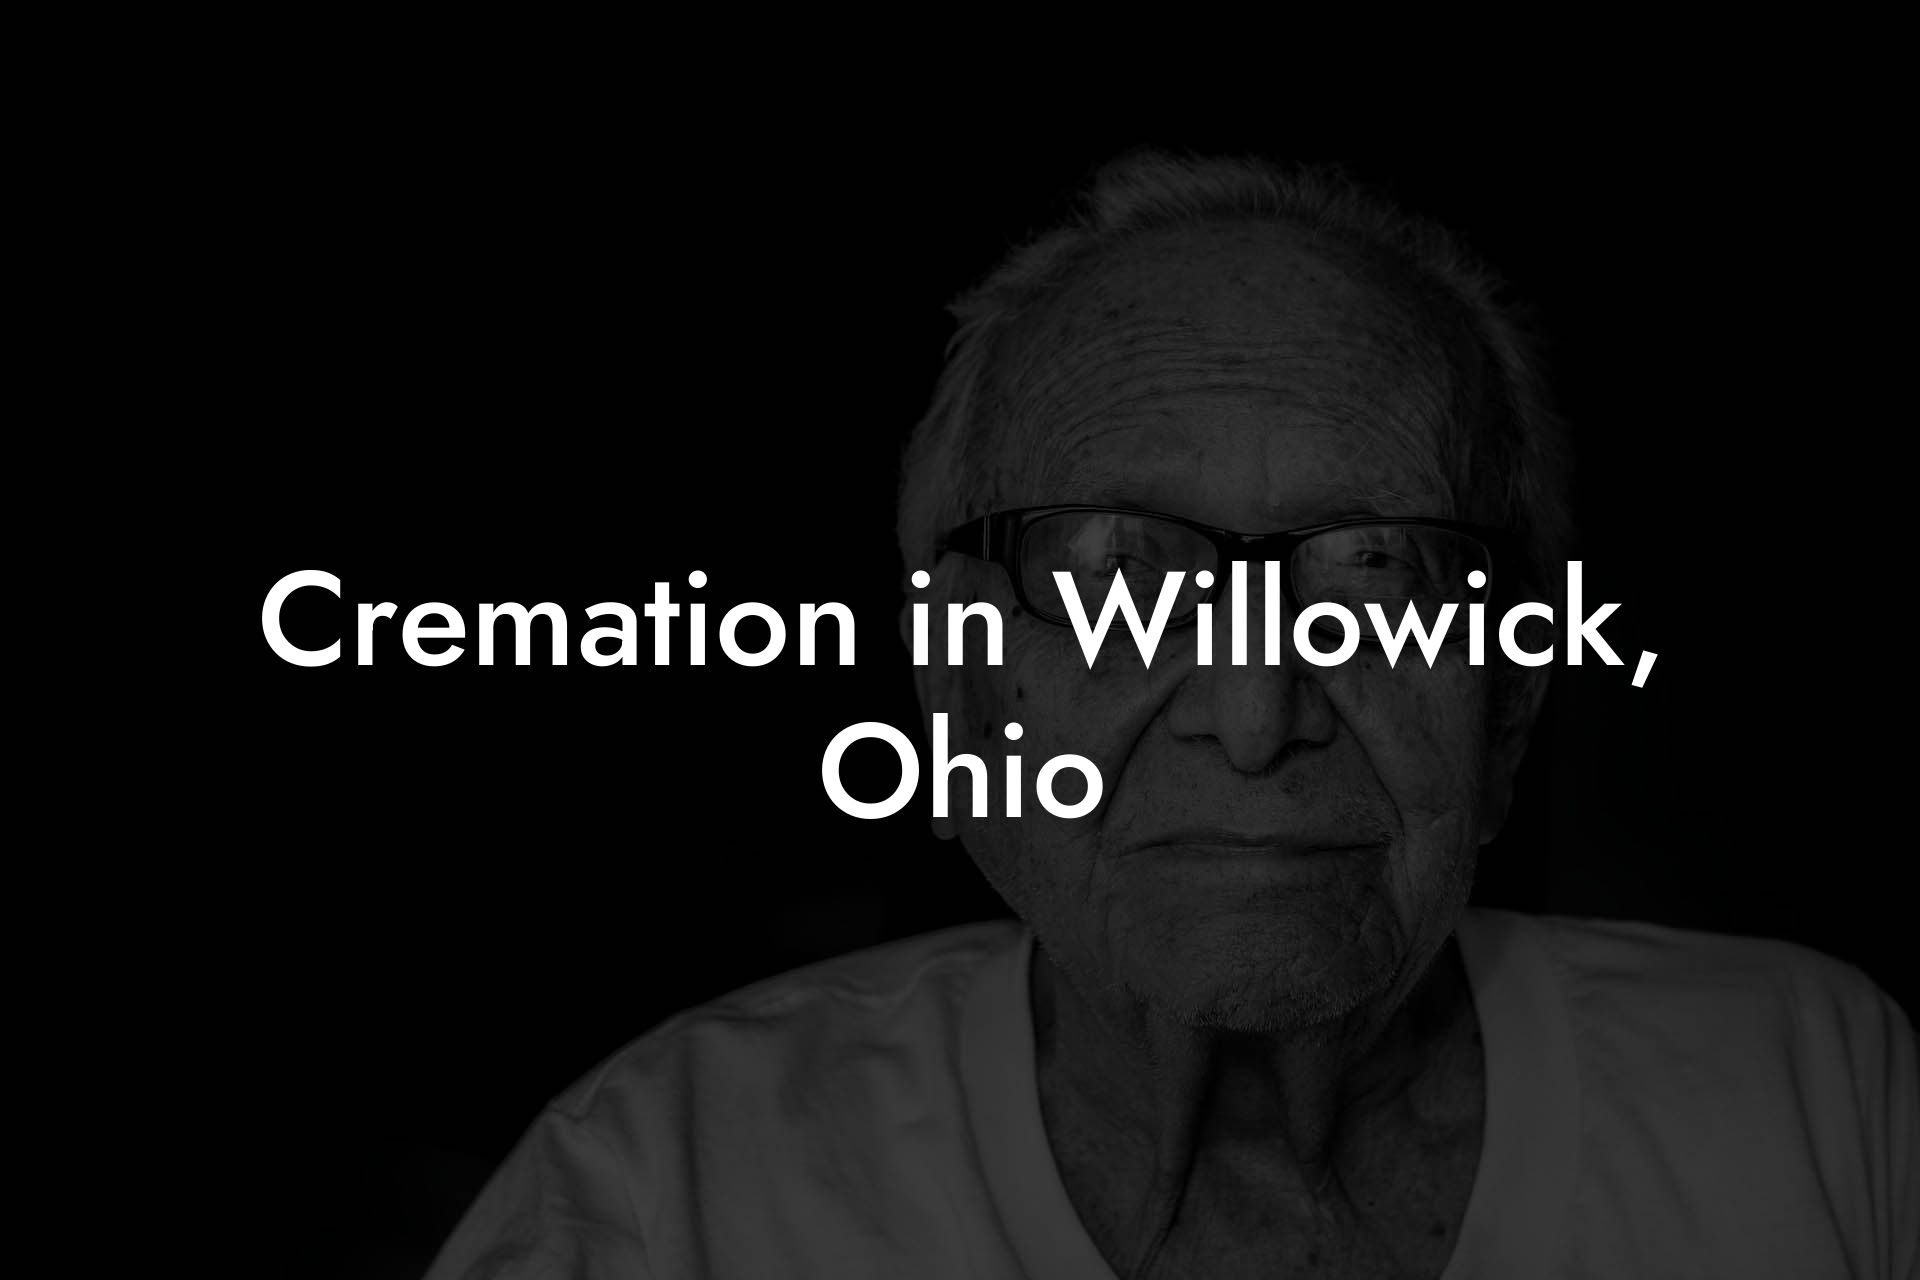 Cremation in Willowick, Ohio